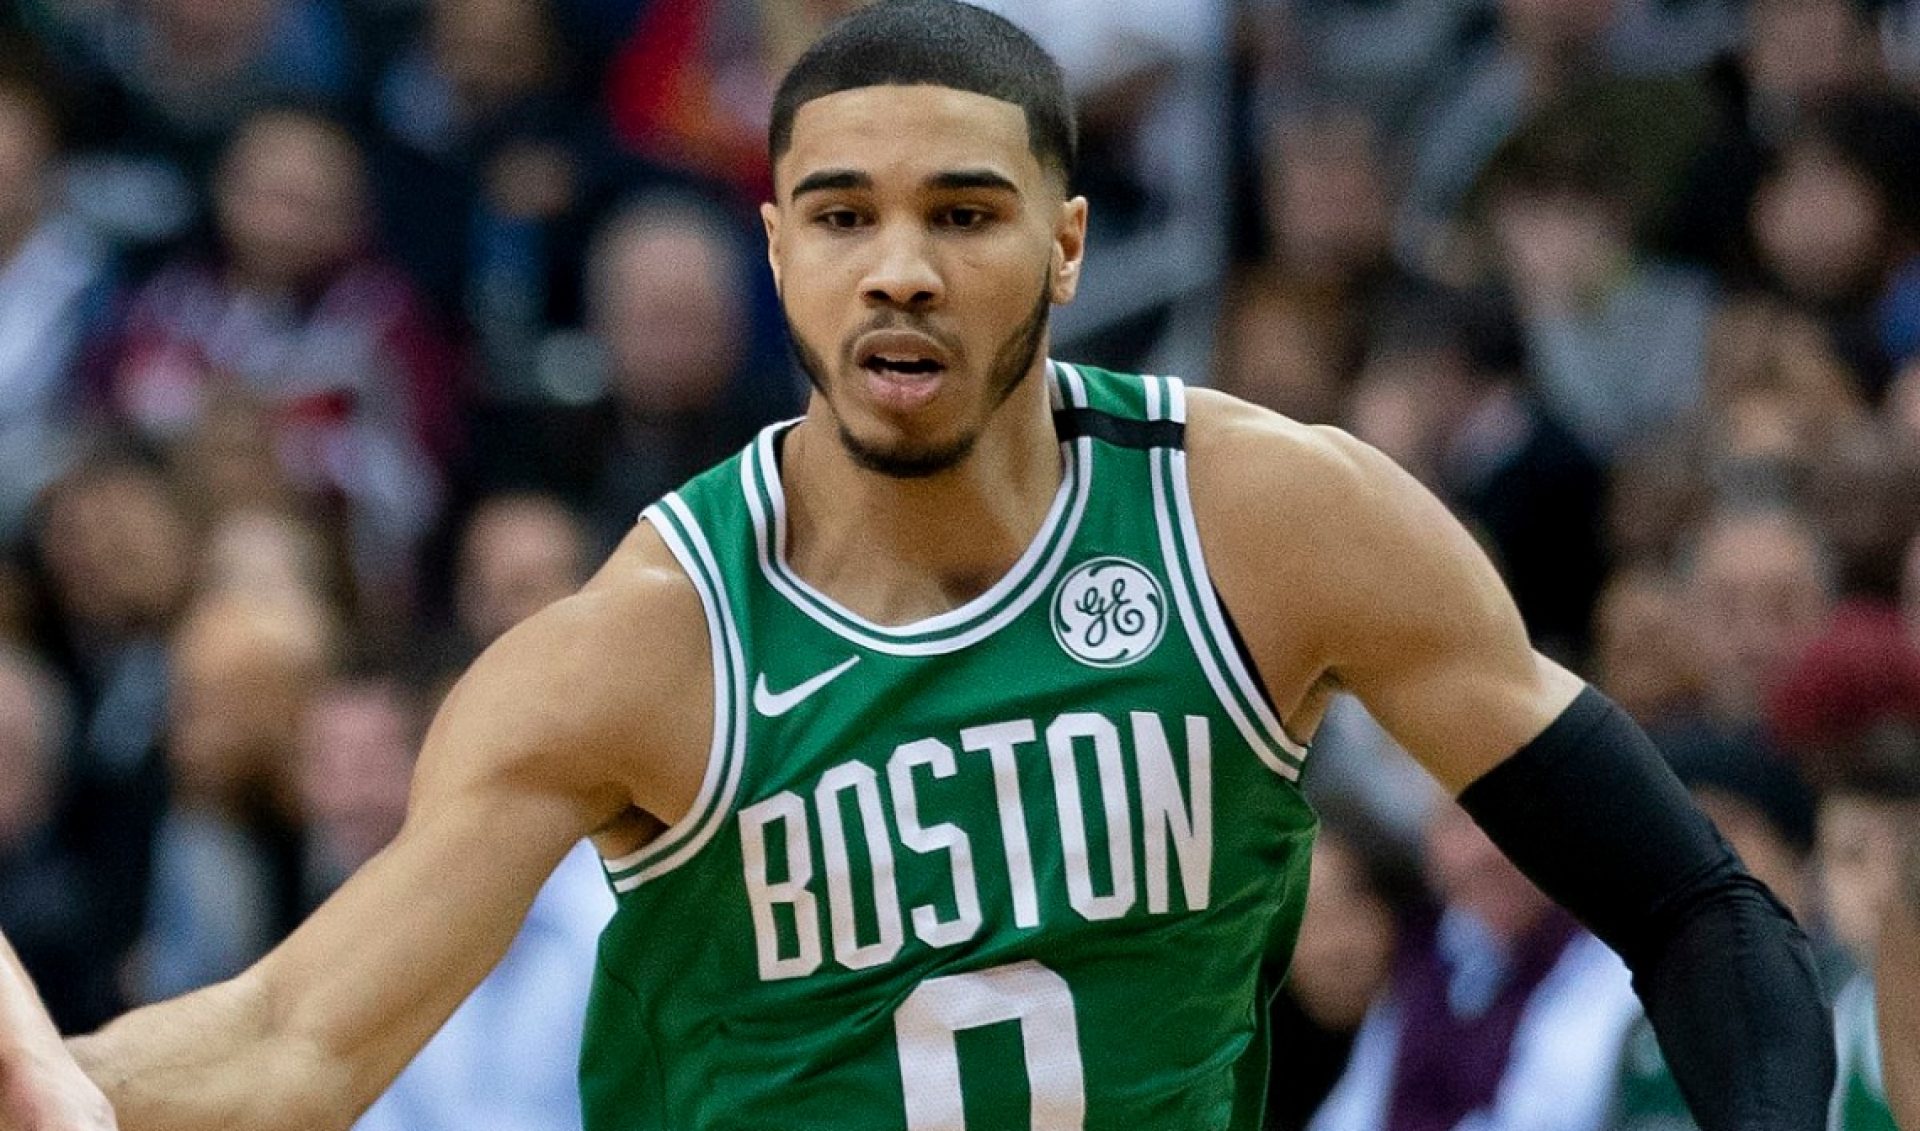 Rising NBA Star Jayson Tatum Learned Some Of His Best Moves From YouTube